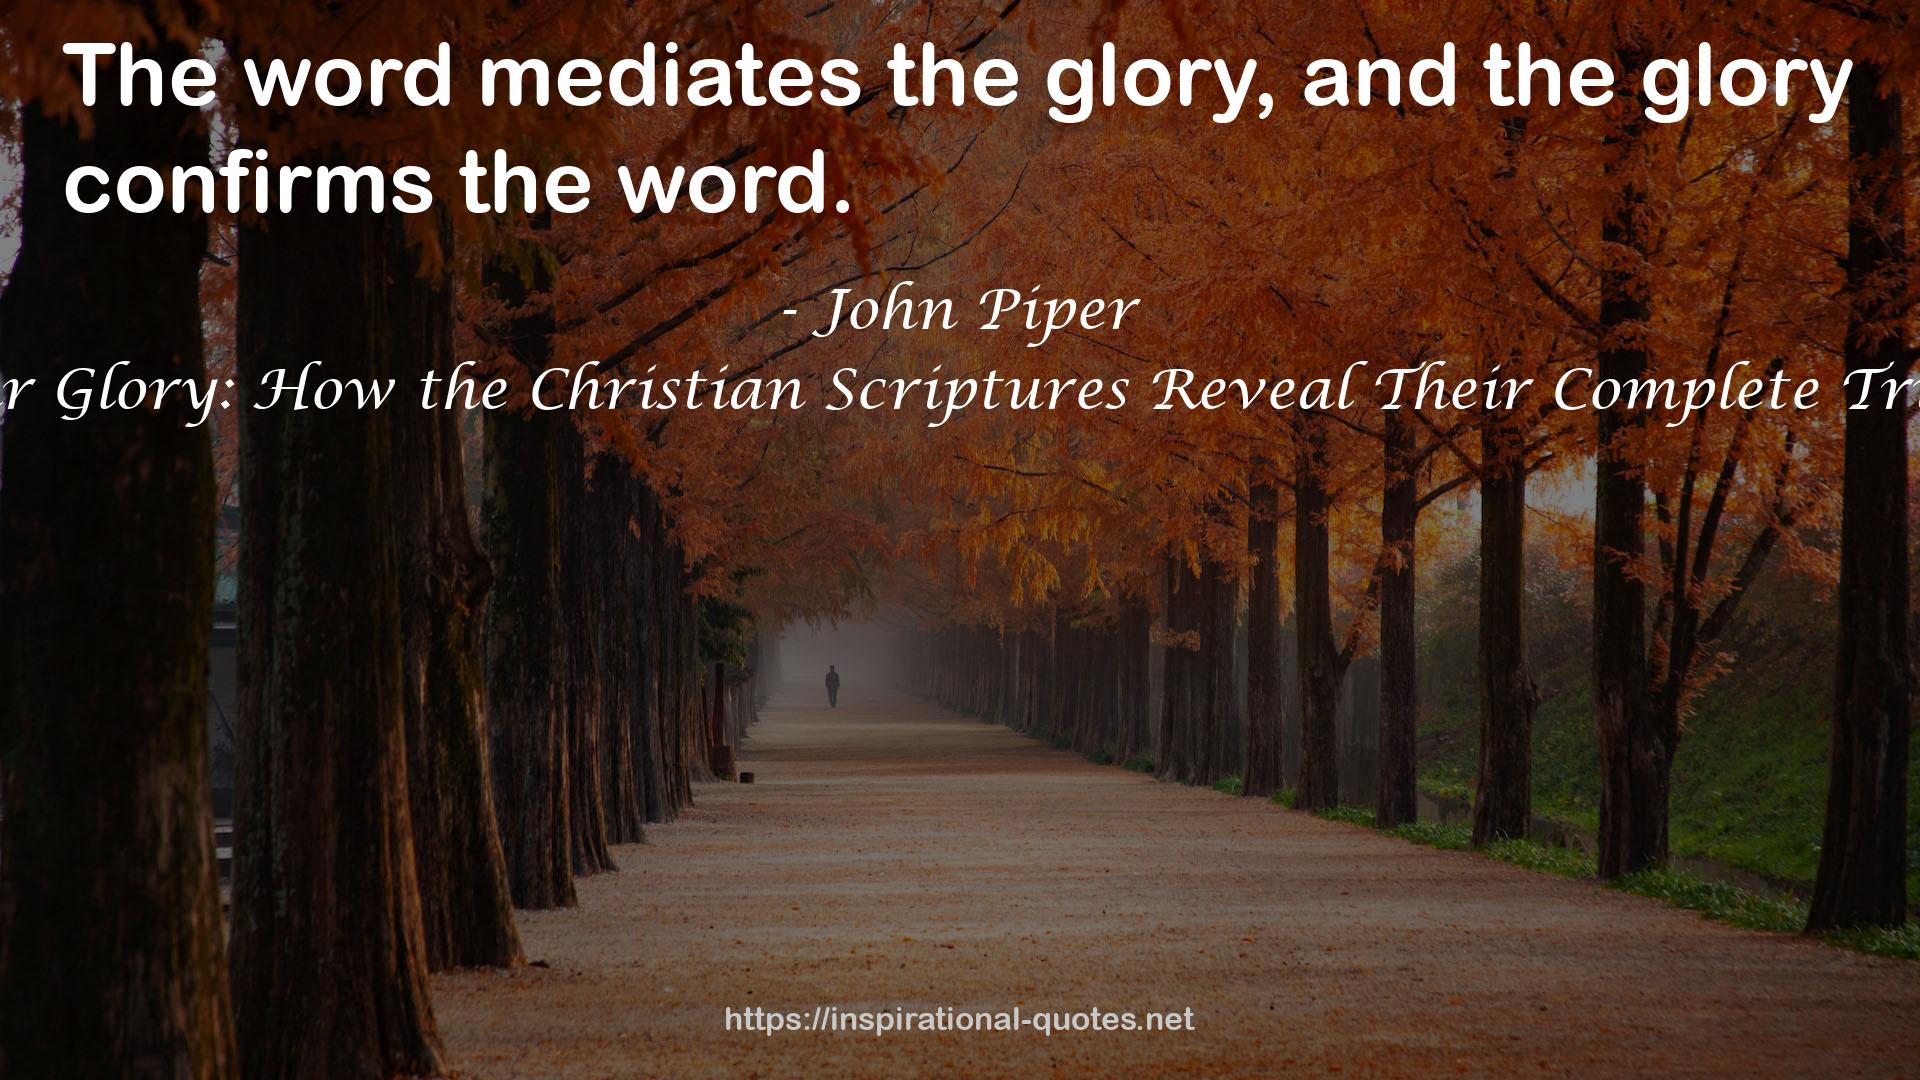 A Peculiar Glory: How the Christian Scriptures Reveal Their Complete Truthfulness QUOTES